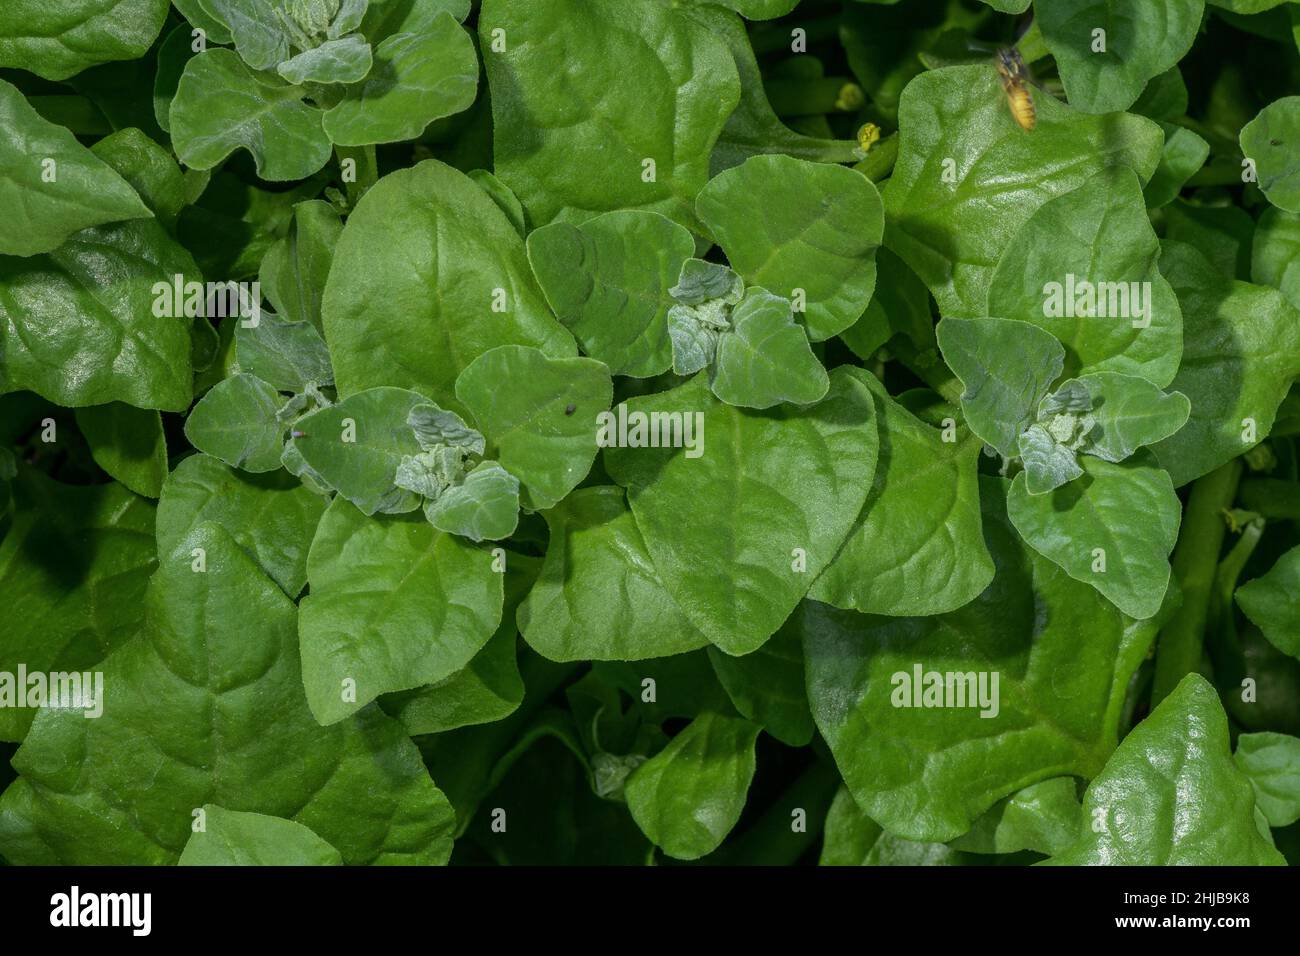 Leaves of New Zealand Spinach, Tetragonia tetragonoides used as vegetable. Stock Photo